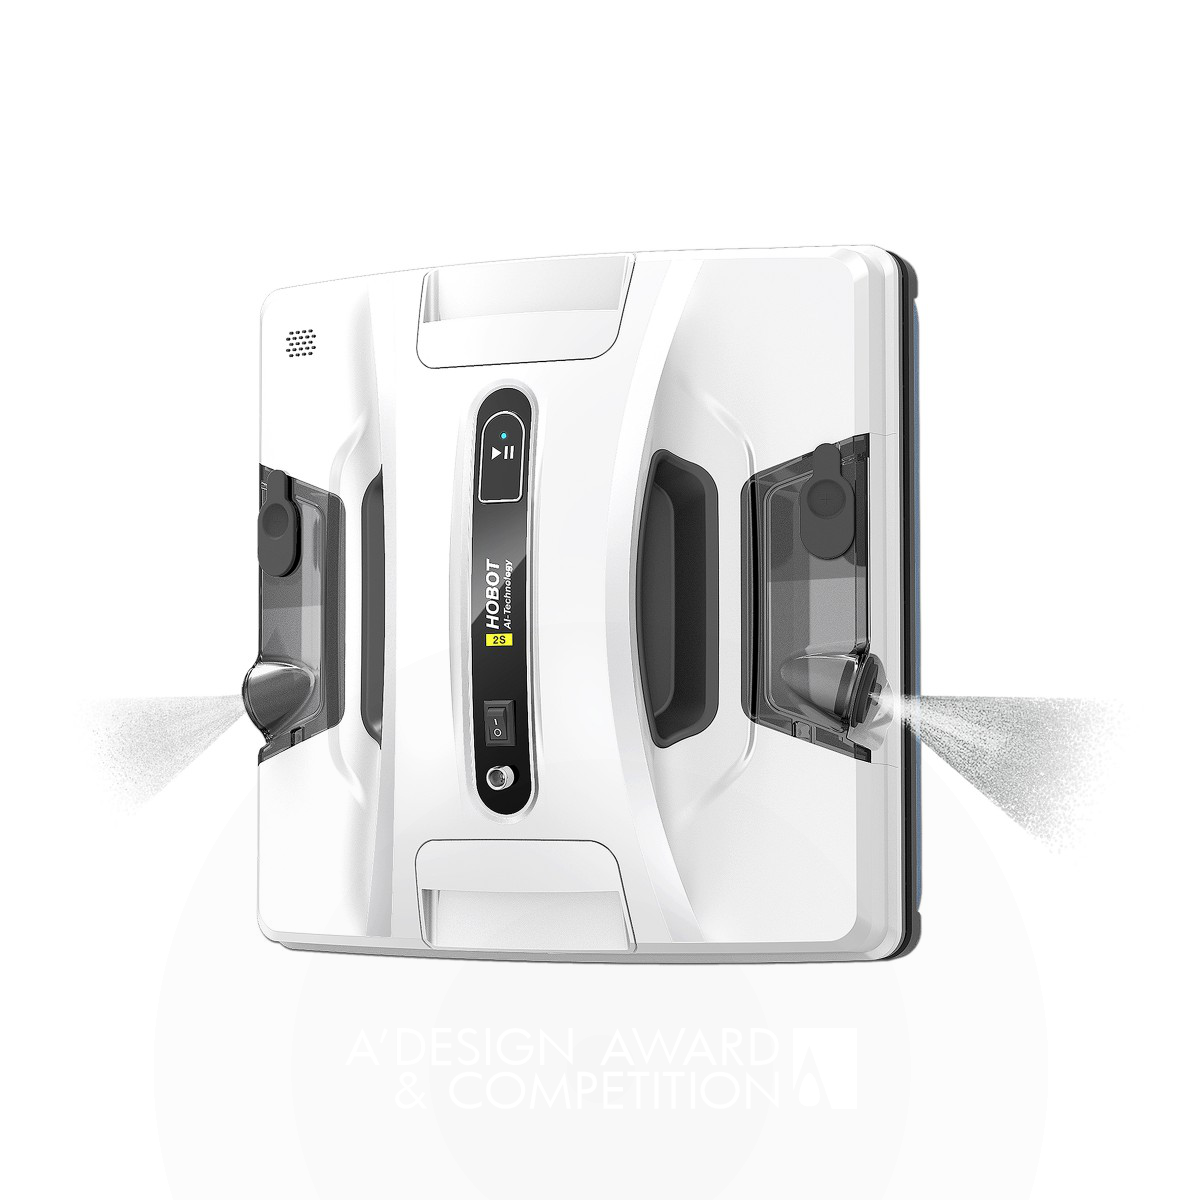 Hobot2S <b>Window Cleaning Robot